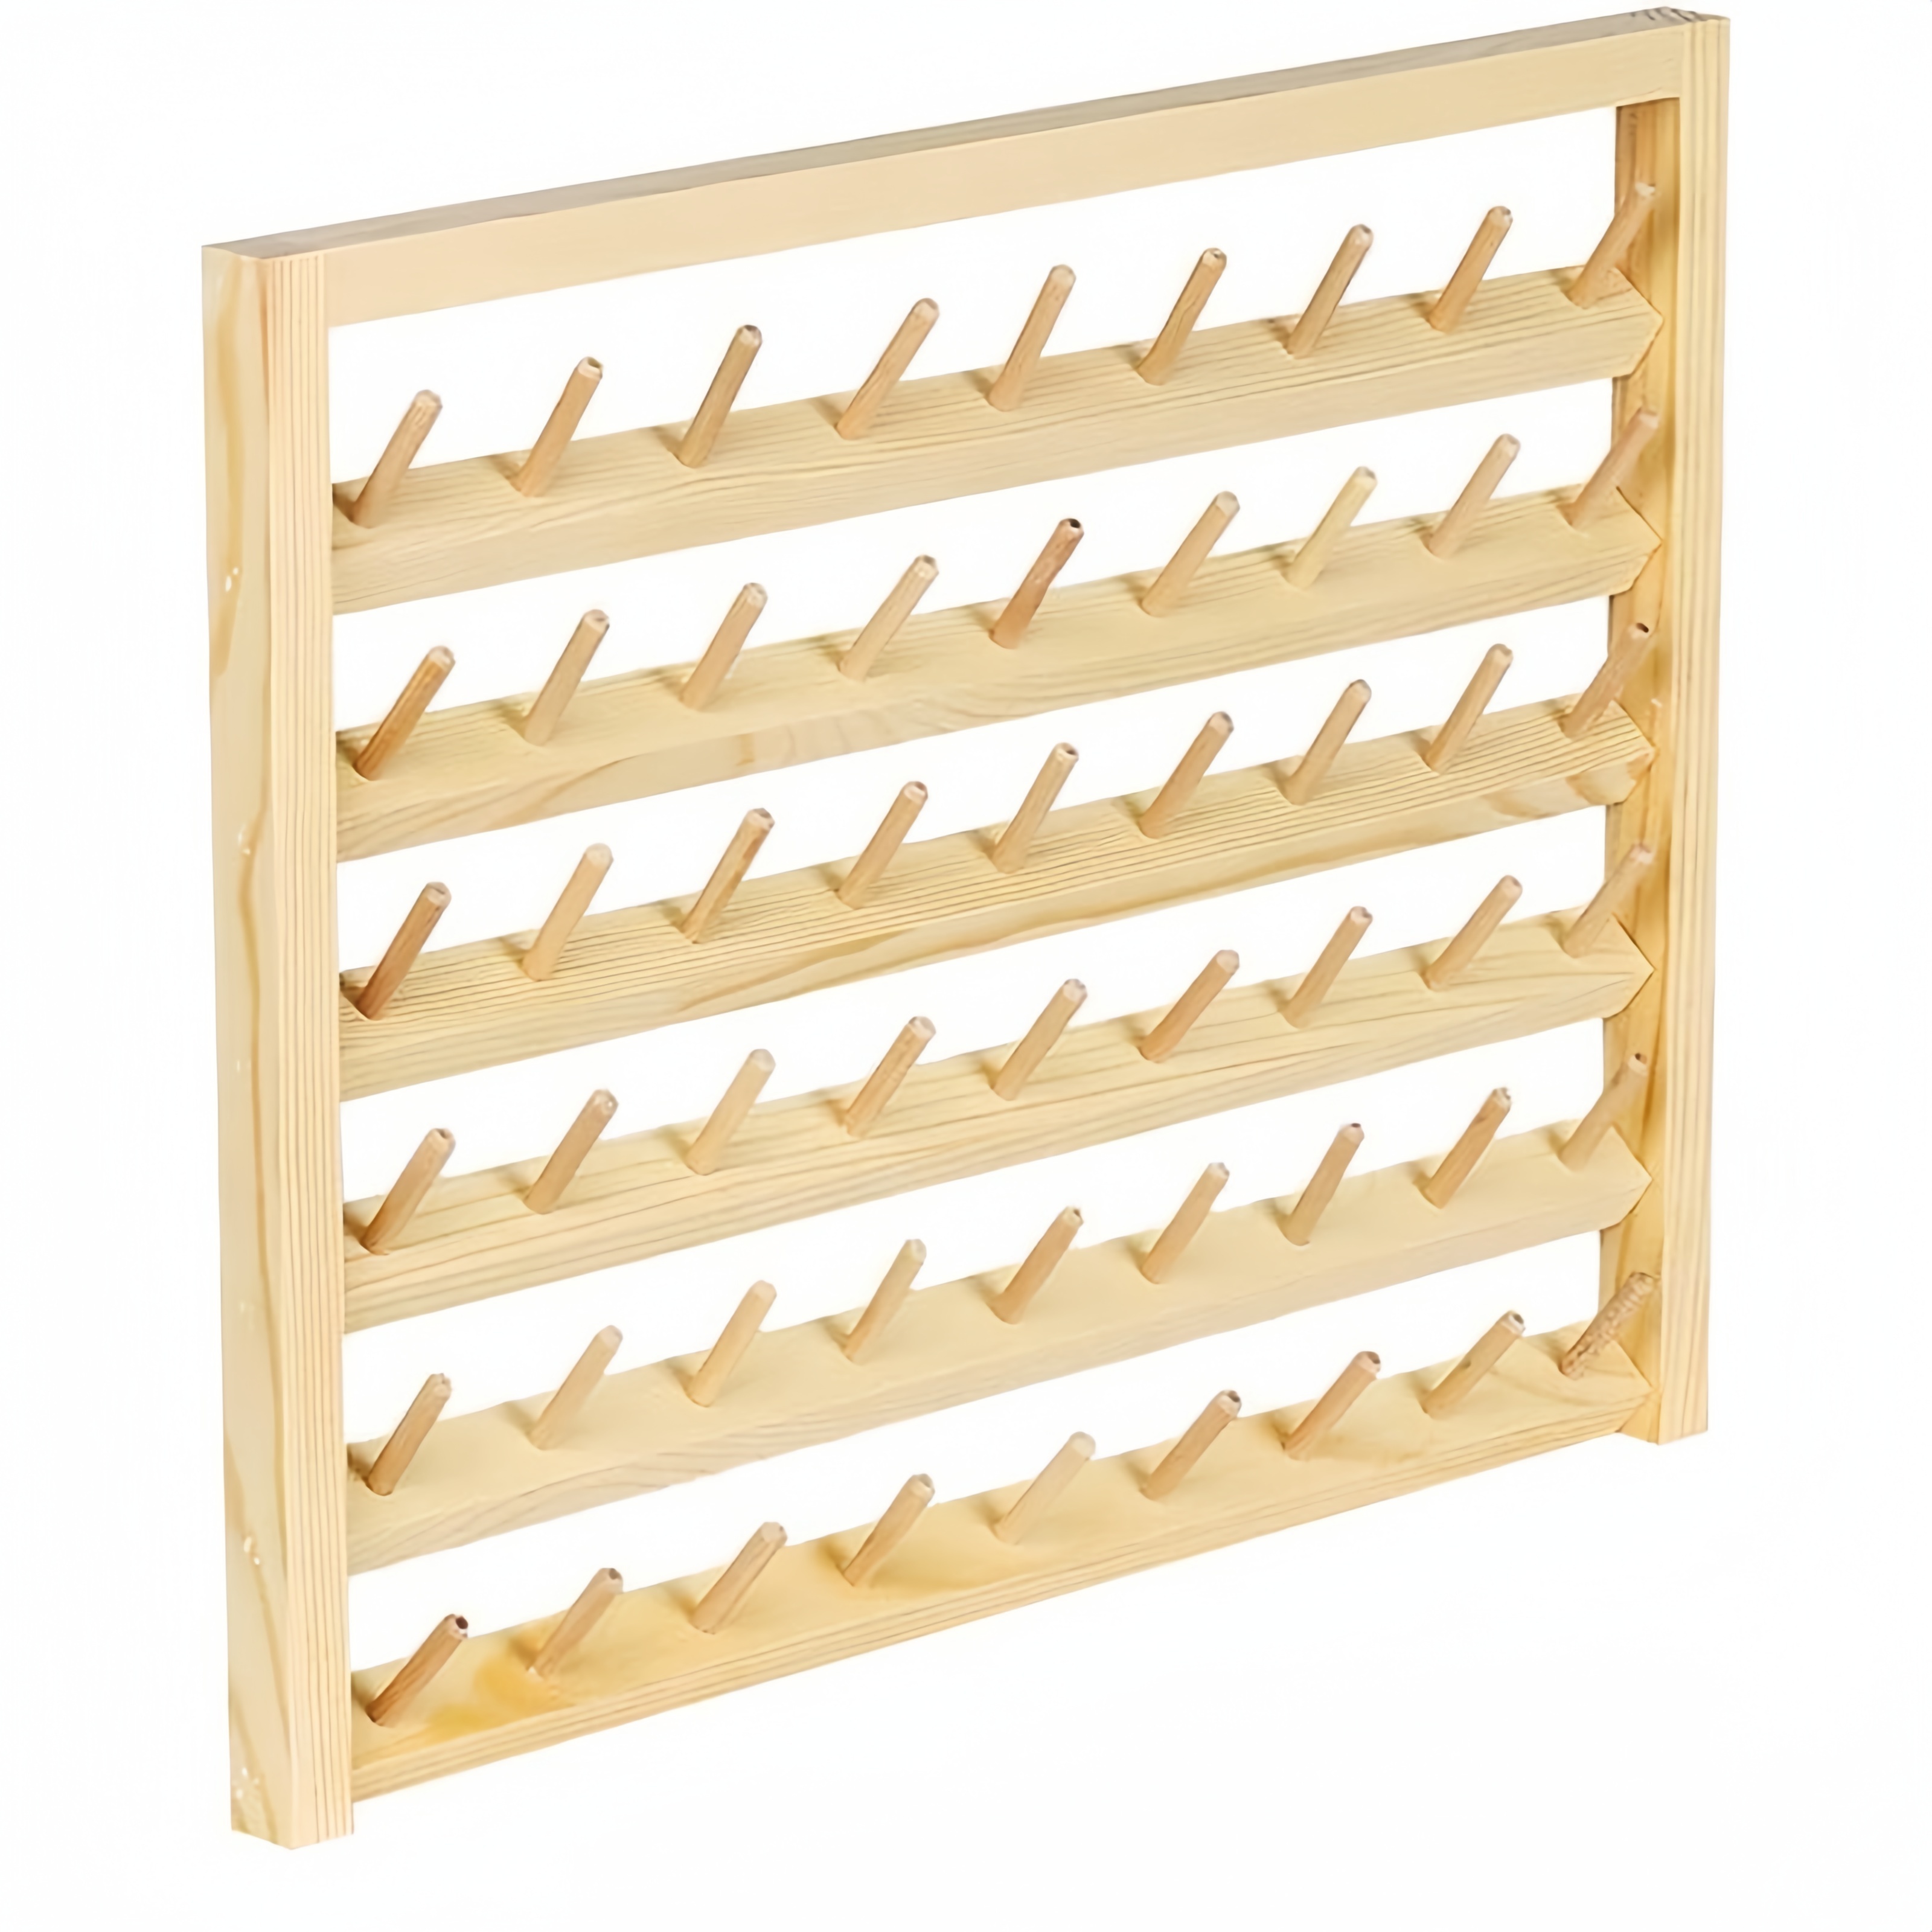 54-Spool Wall Mounted Wooden Sewing Thread Rack